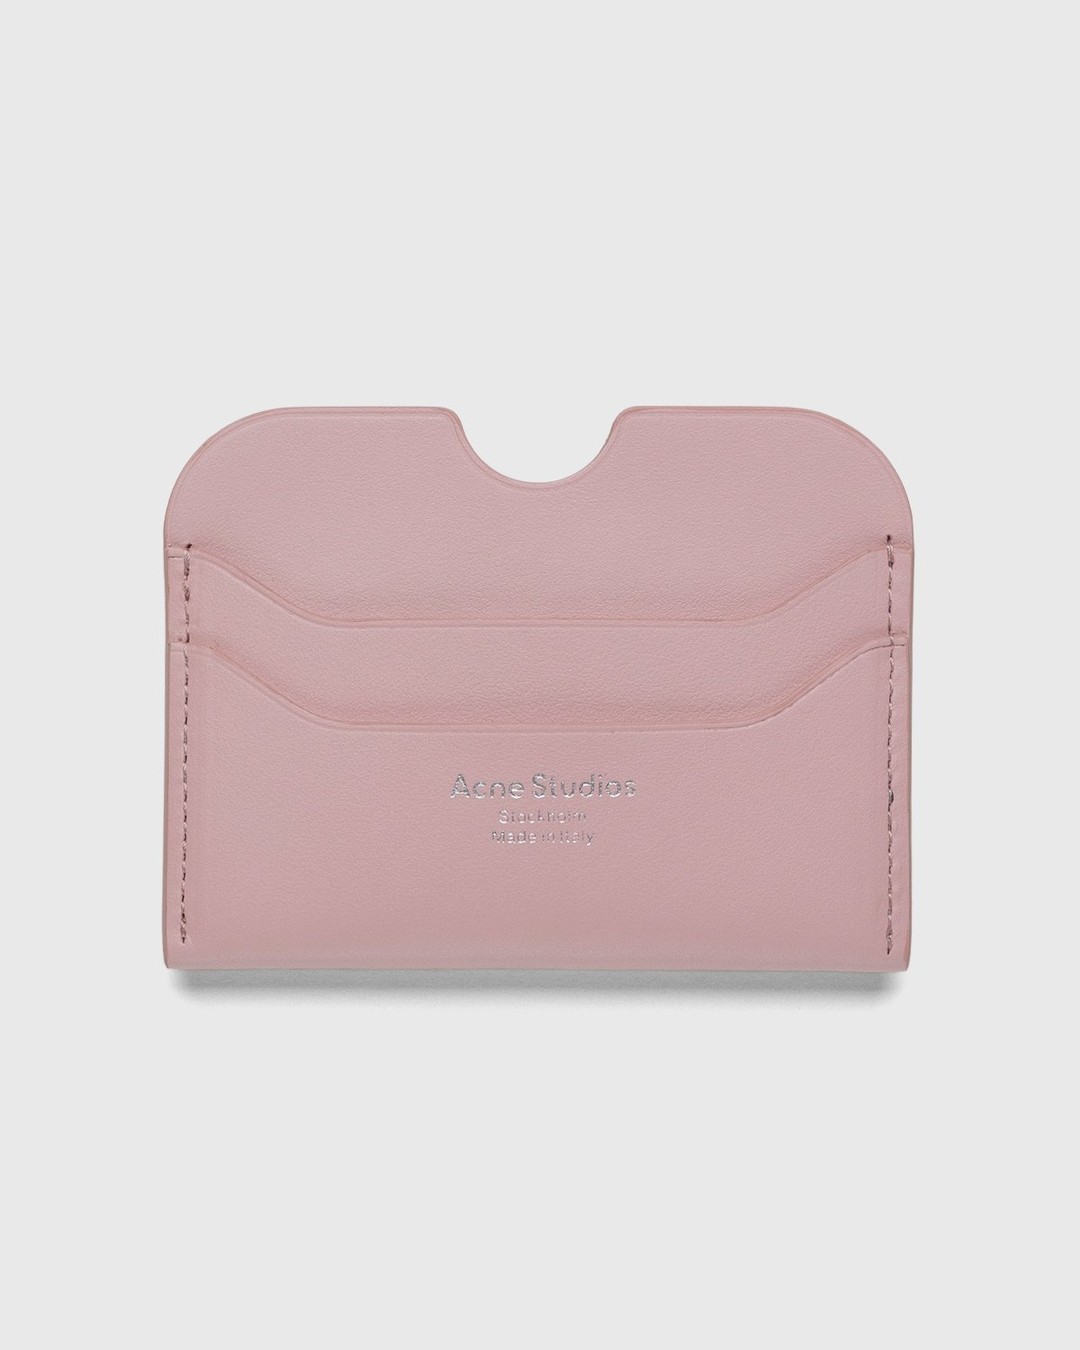 Acne Studios – Leather Card Case Powder Pink - Card Holders - Pink - Image 1